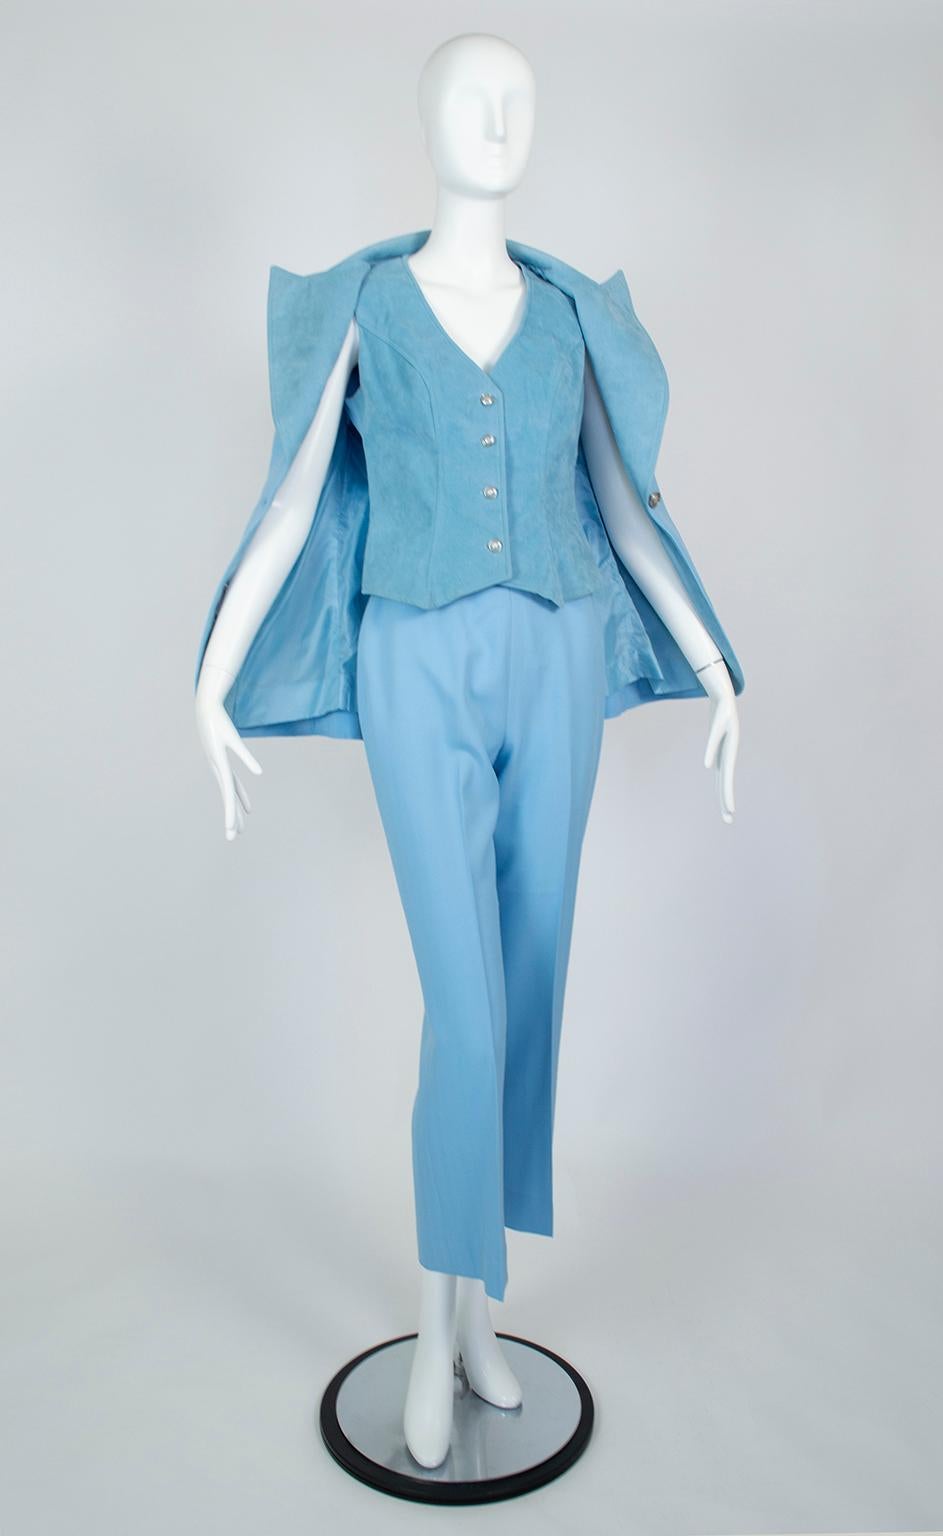 Don’t let the color fool you into thinking it’s a Disco-era castoff.  A dash of Elvis (the lapels), a pinch of YSL (